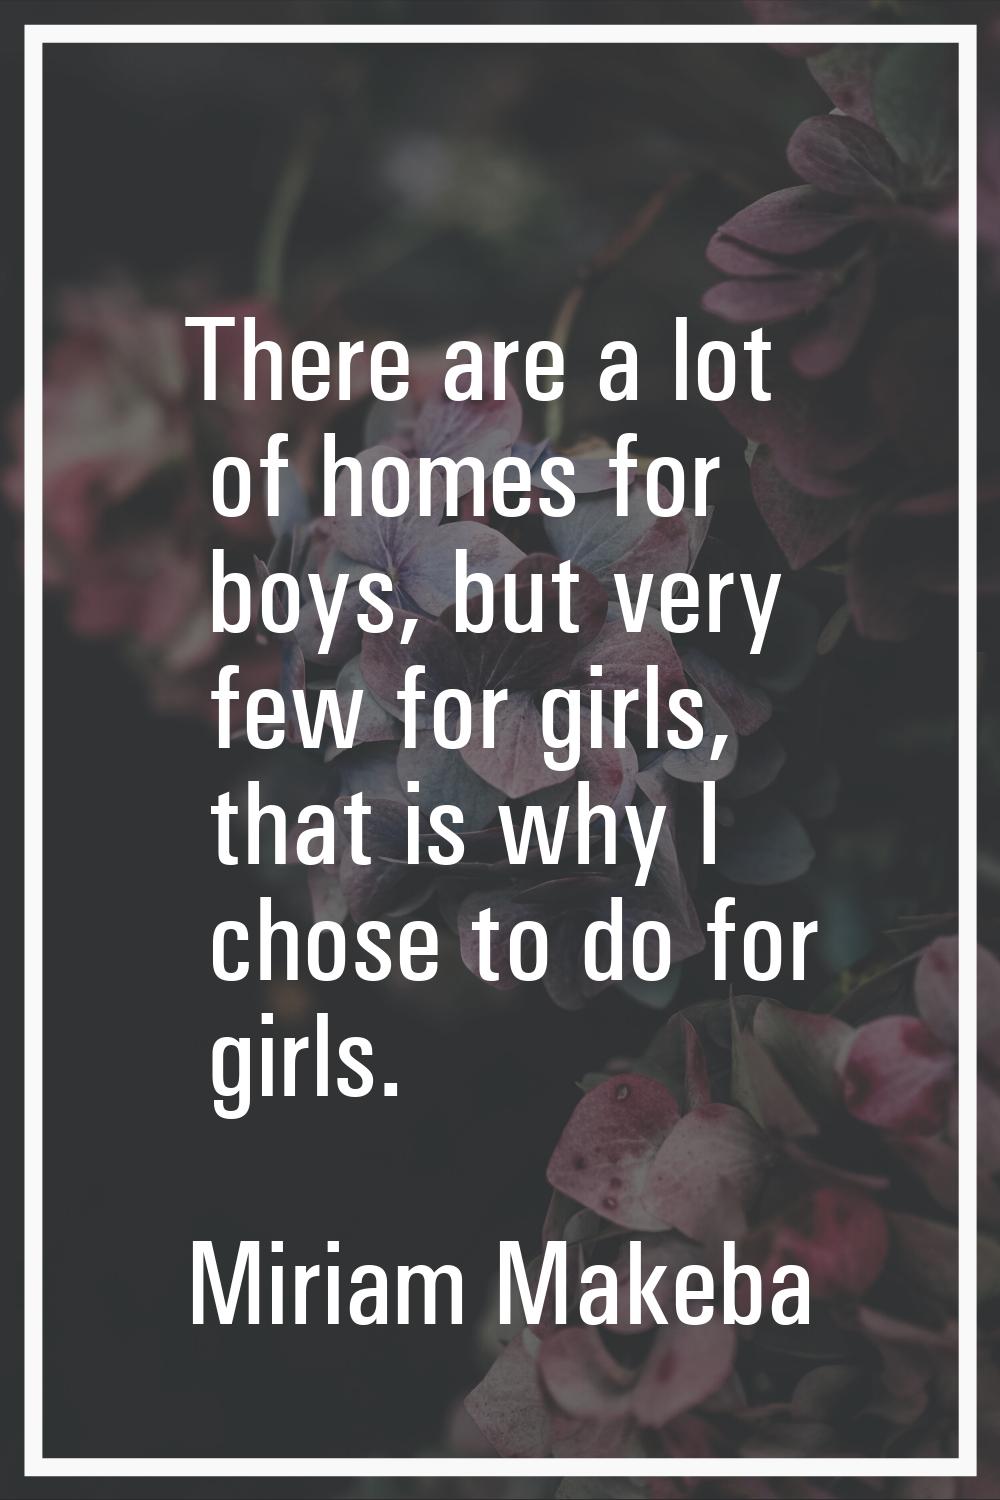 There are a lot of homes for boys, but very few for girls, that is why I chose to do for girls.